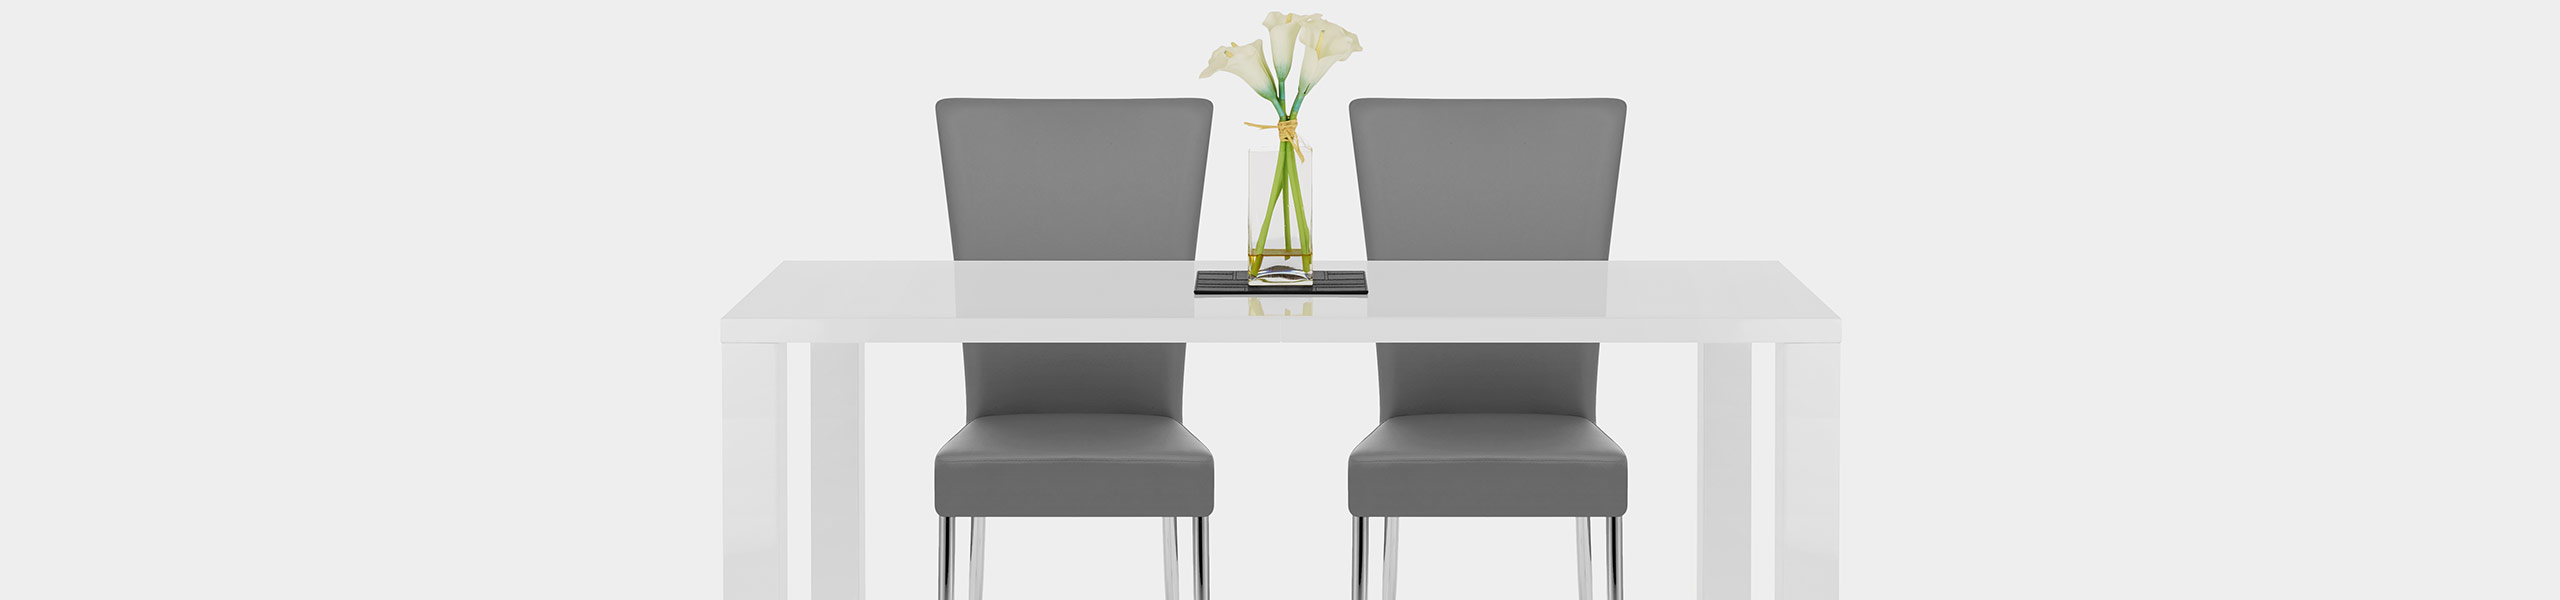 Picasso Dining Chair Grey Video Banner